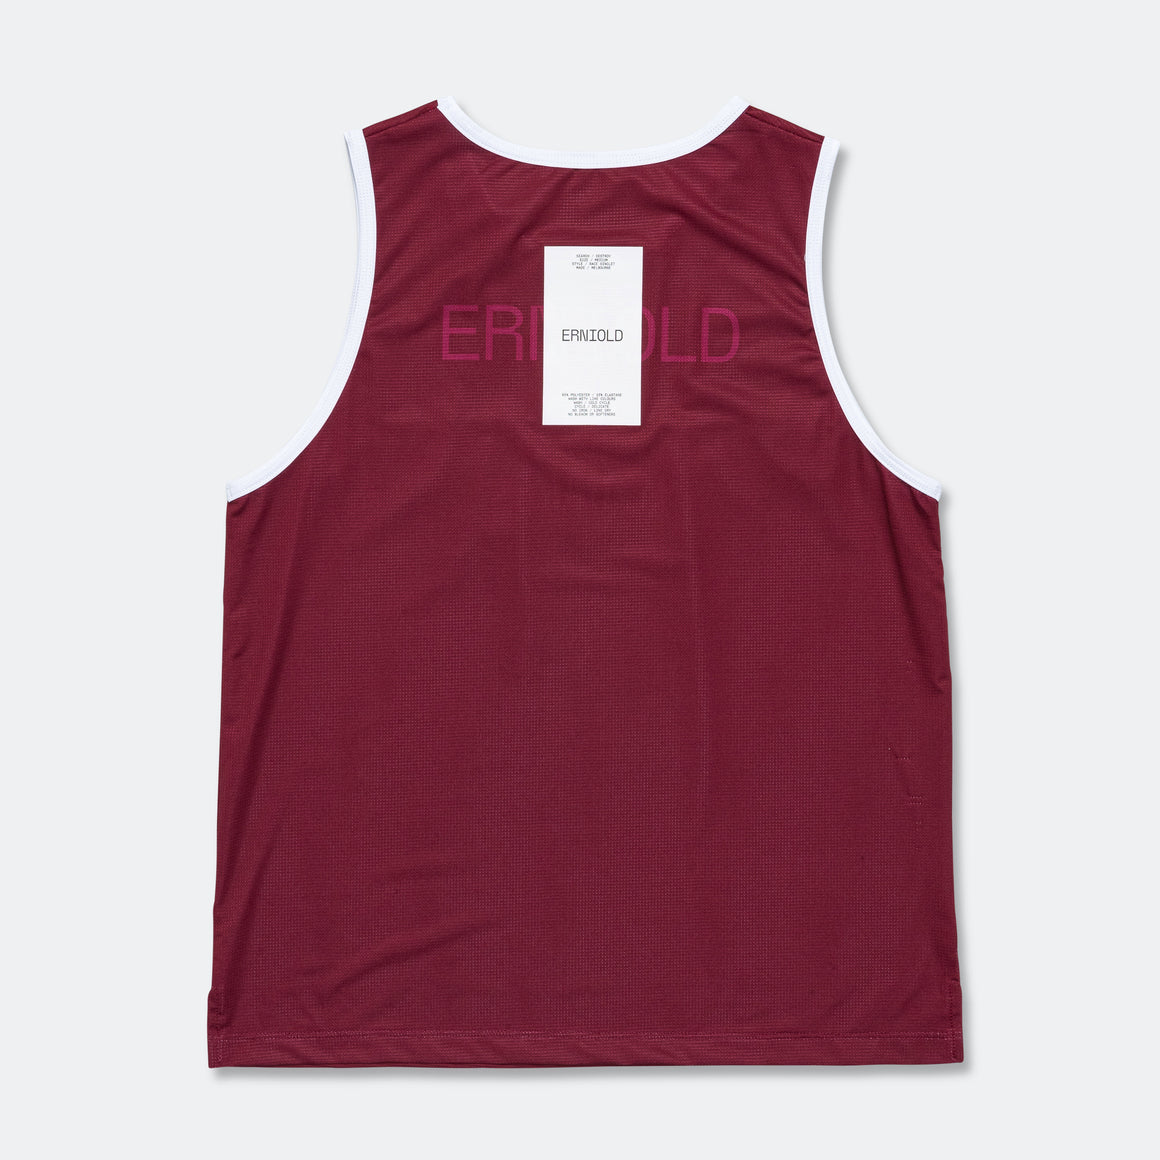 Erniold - Womens Race Singlet - Hare - Up There Athletics